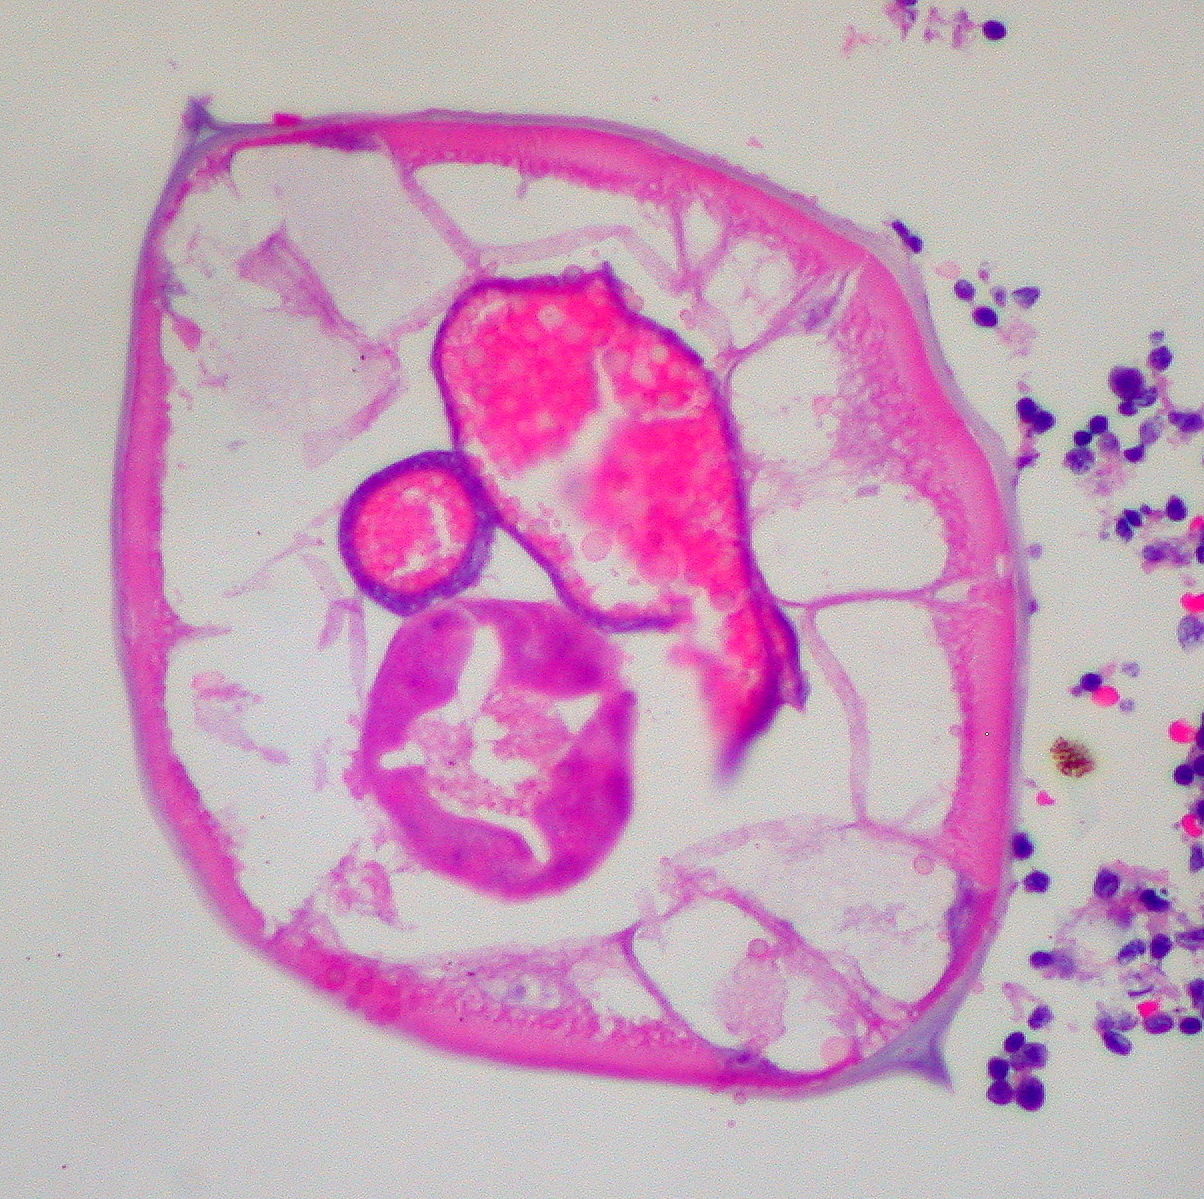 High magnification micrograph of a pinworm in cross section in the appendix, H&E stain